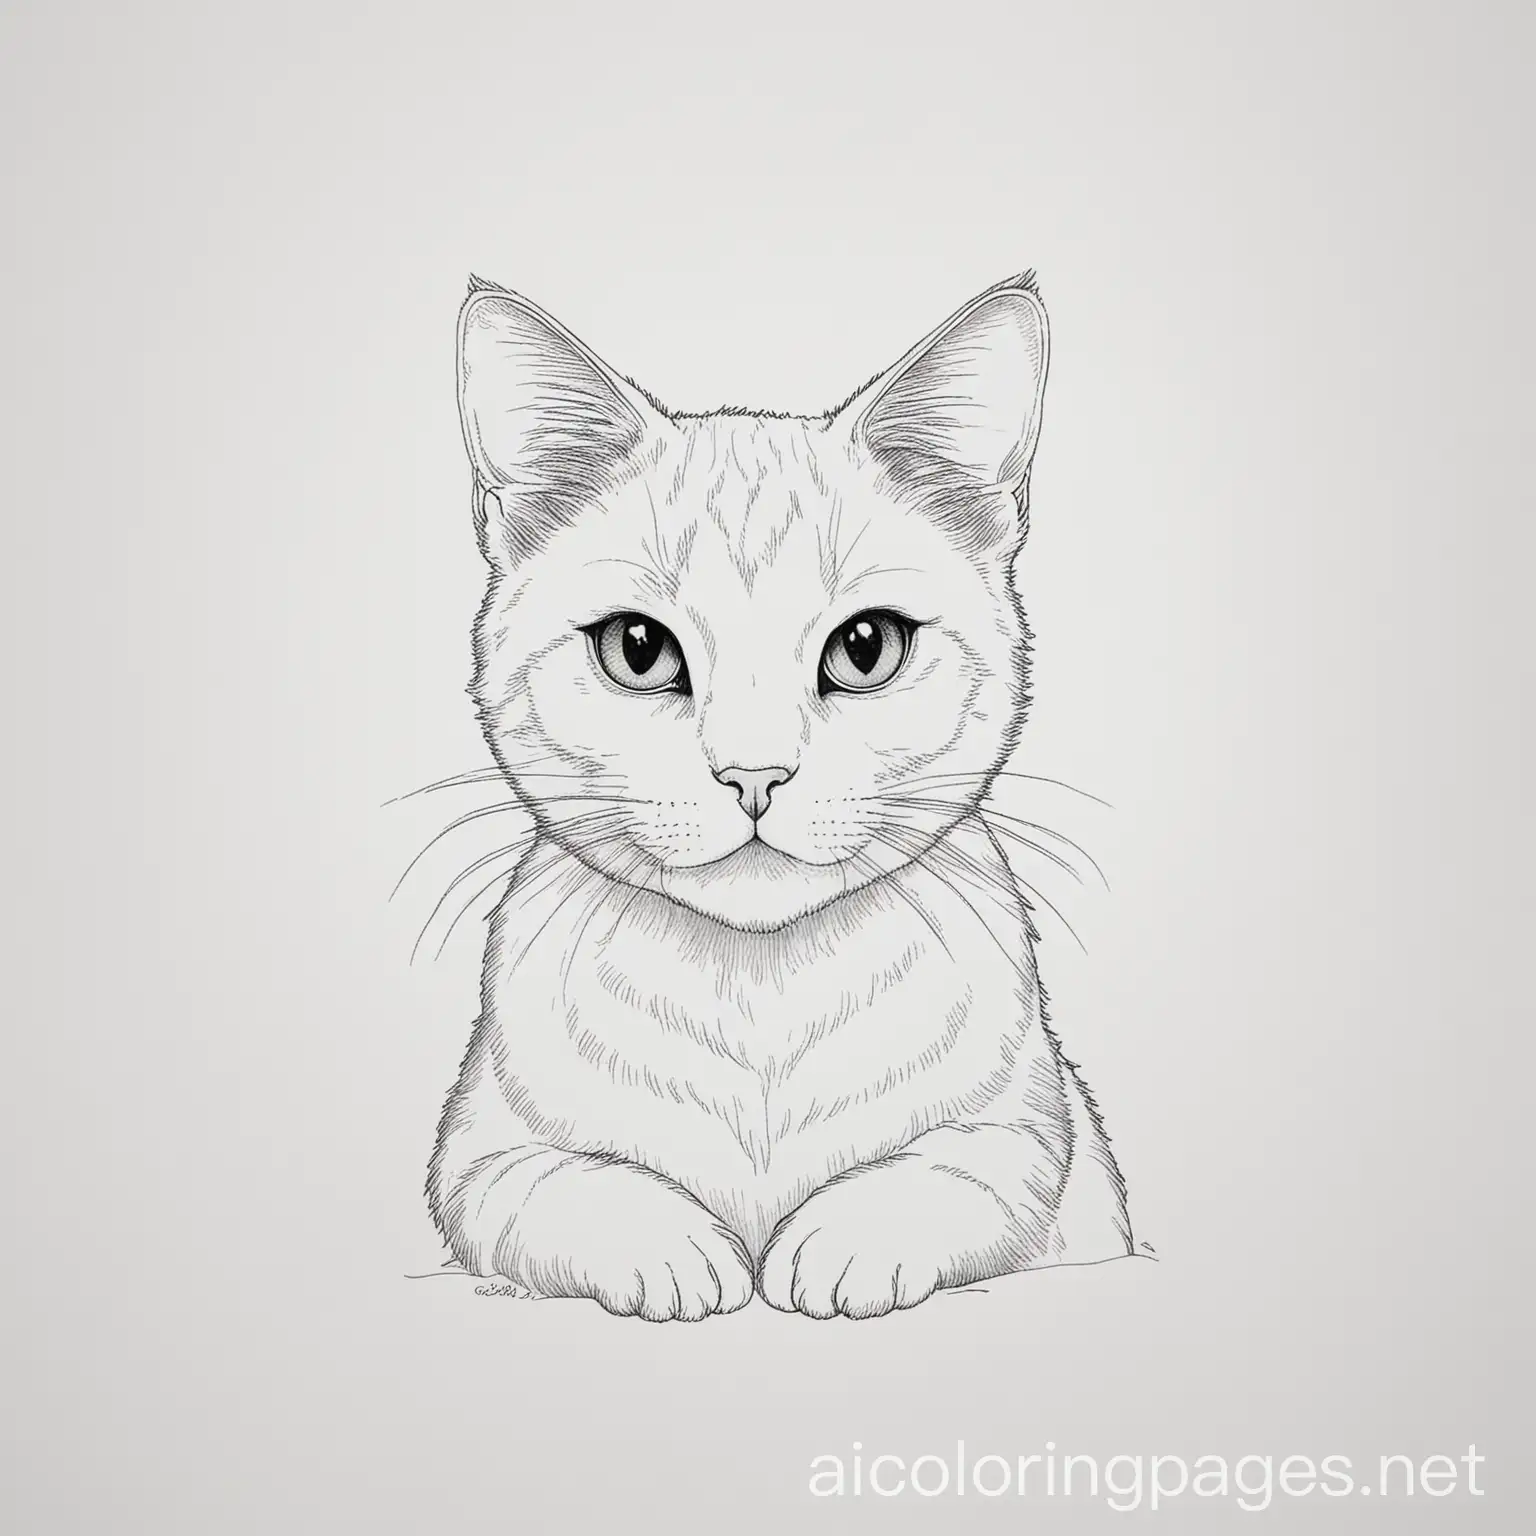 Simple-Line-Art-Coloring-Page-of-a-Cat-on-White-Background